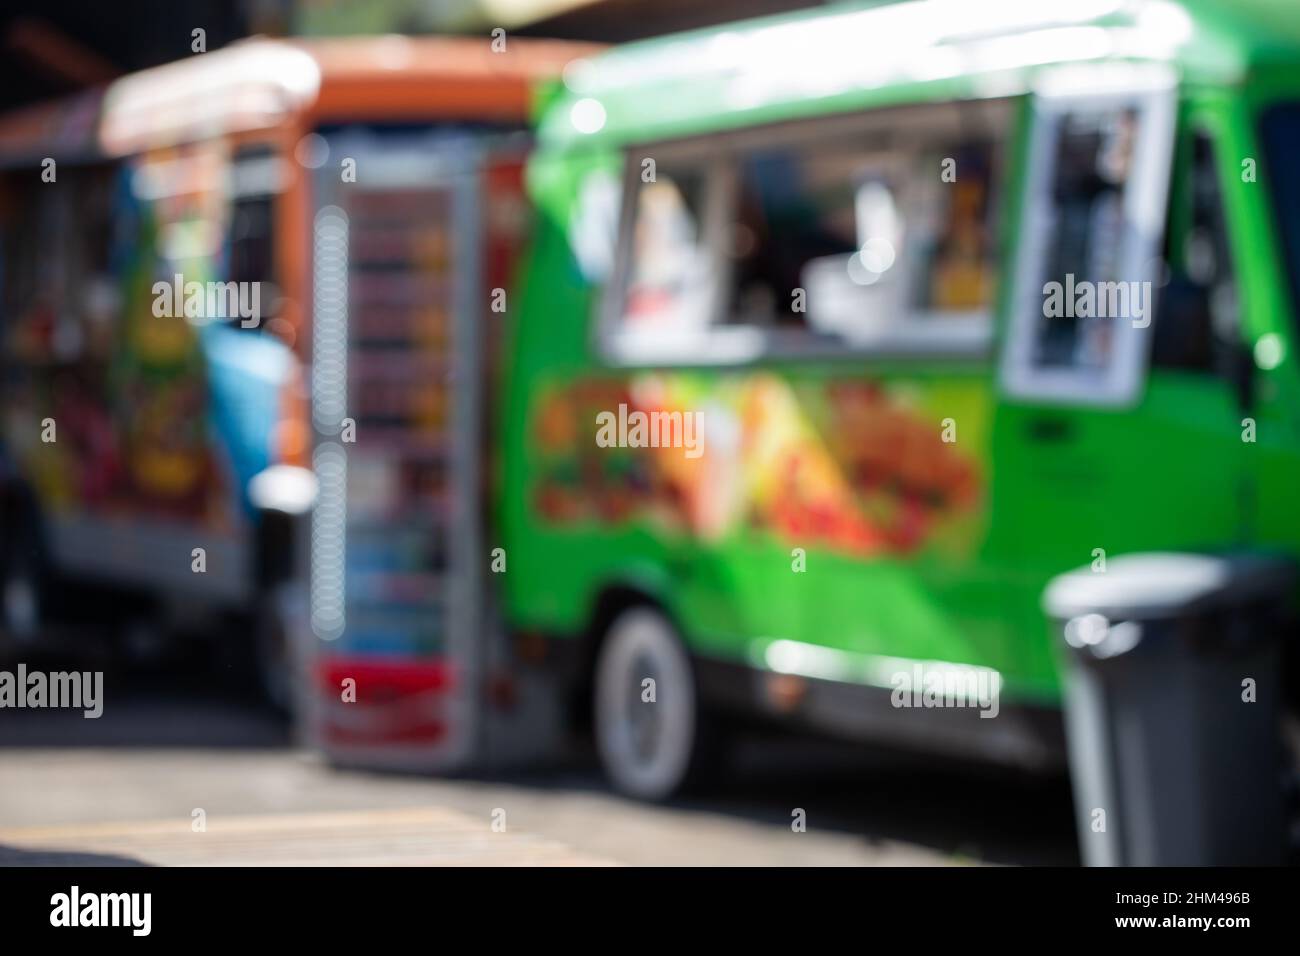 Abstract blurred background of food trucks Stock Photo